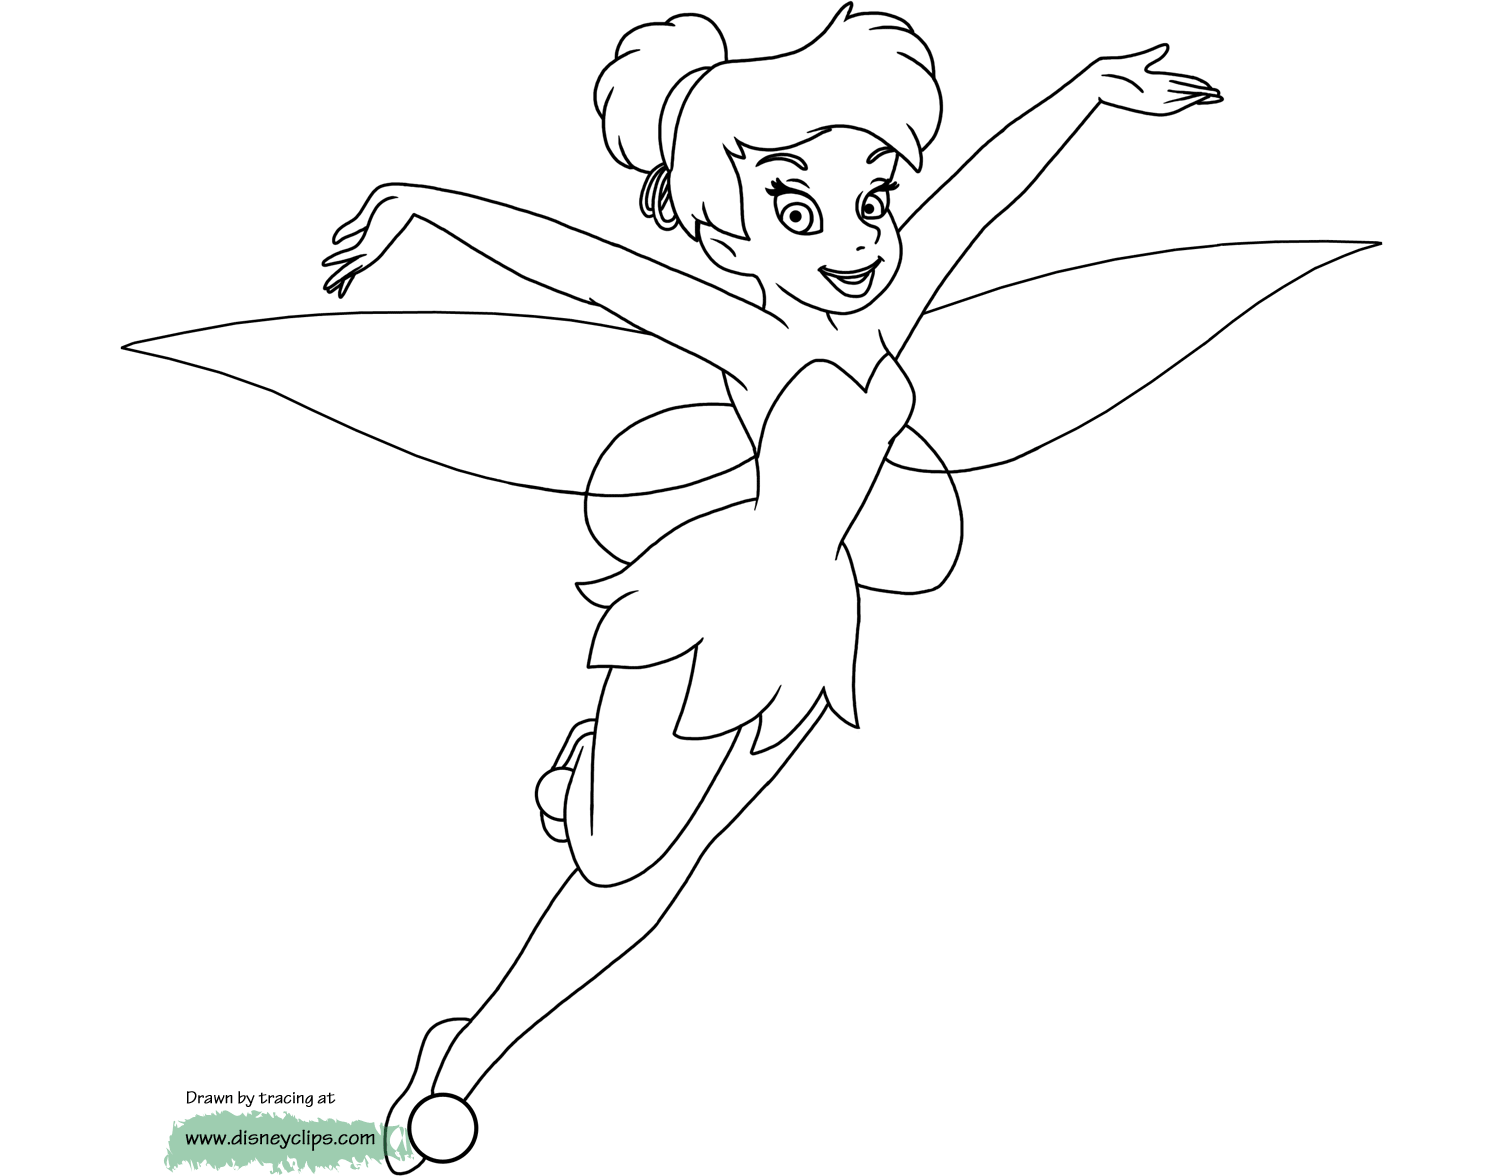 Disney fairies coloring pages